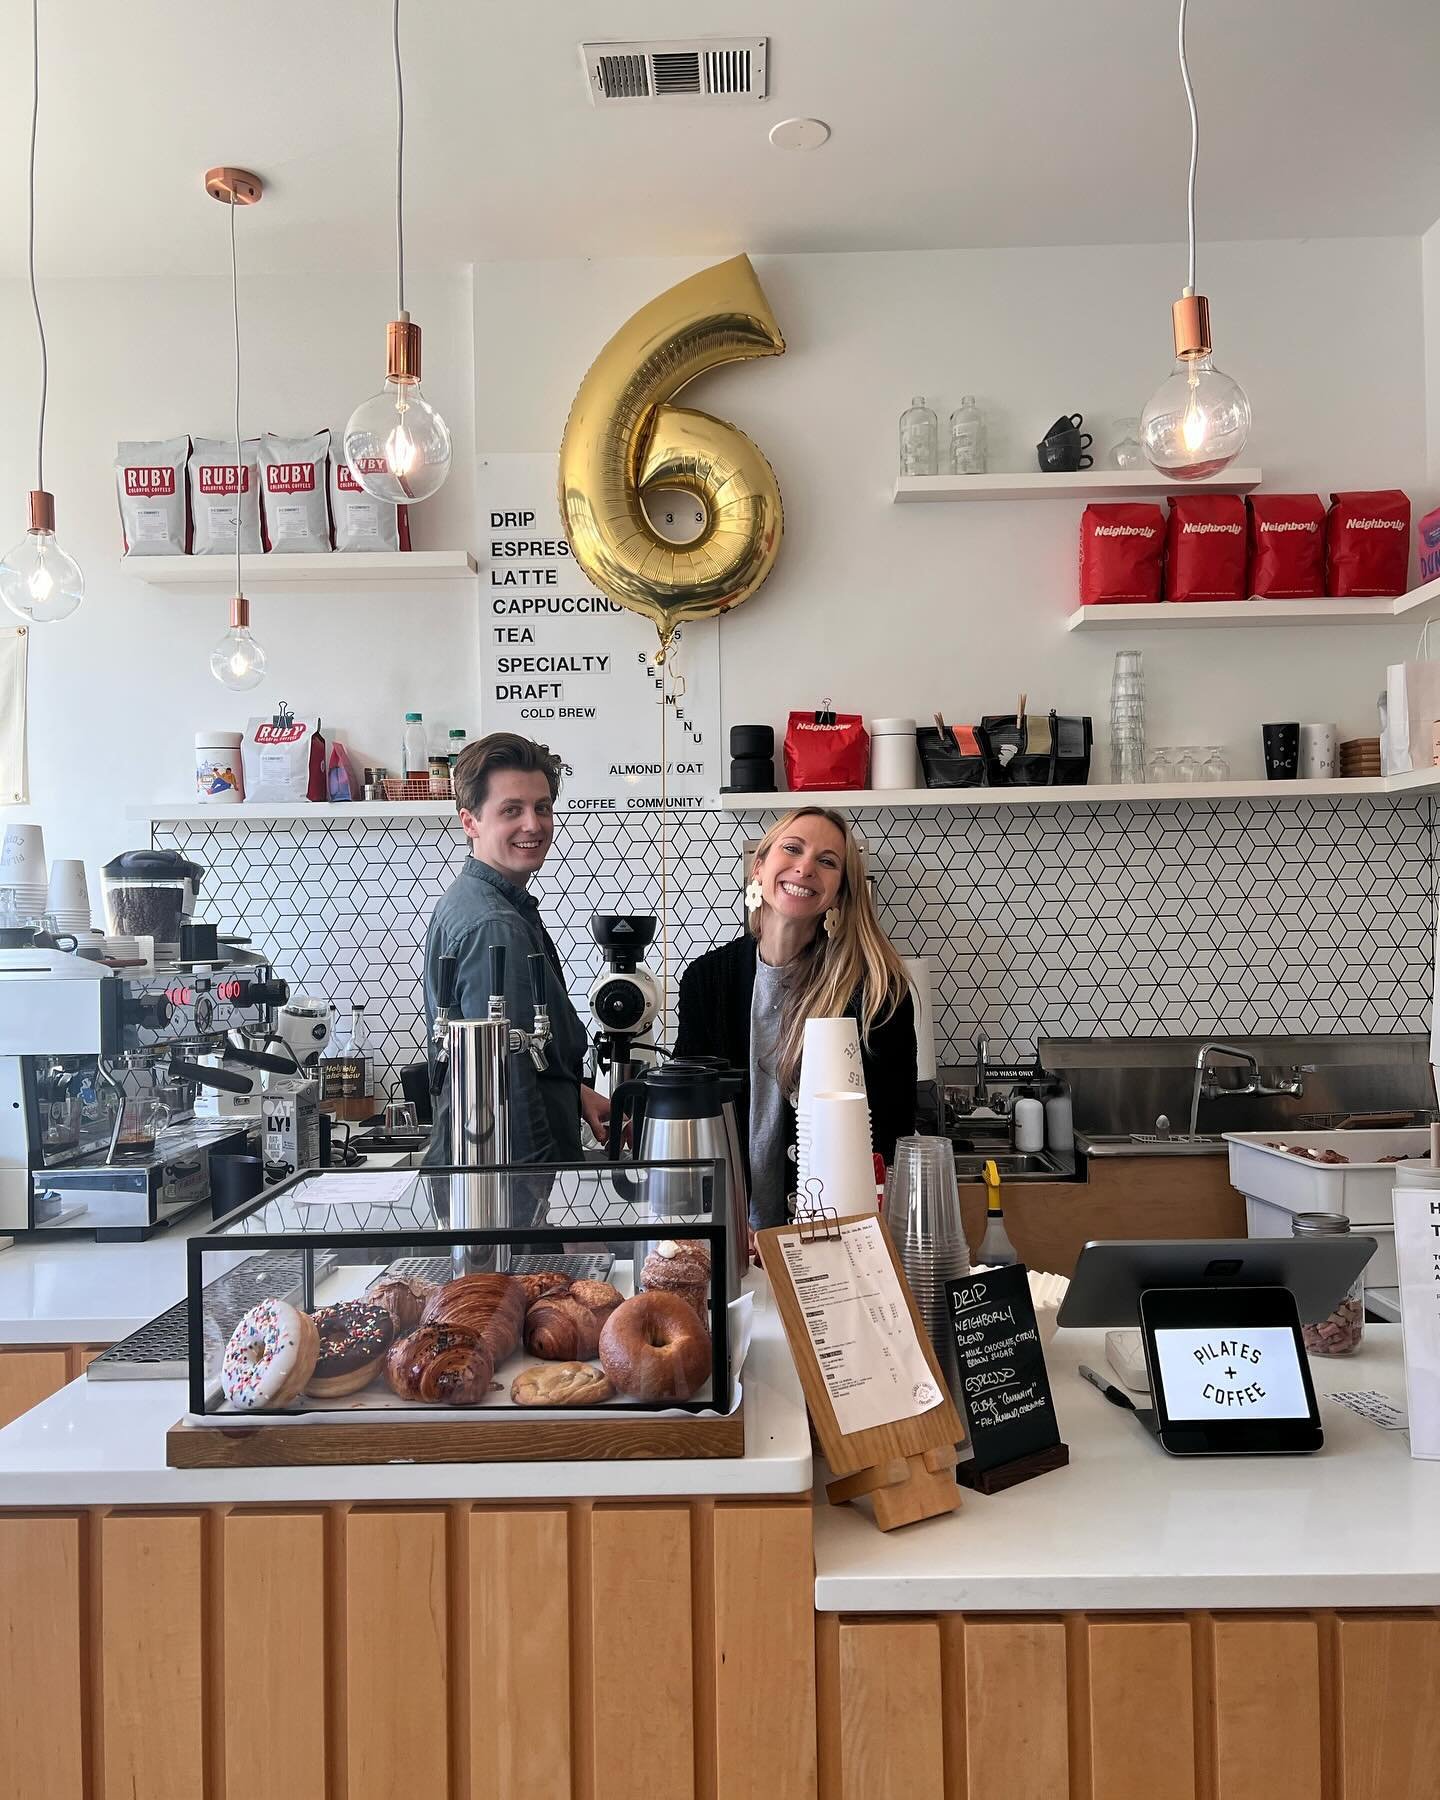 This weekend we celebrate six years of the Cafe! And you know it&rsquo;s a special weekend when @jacquelyn_brennan gets behind the bar.
&bull;
As a special way to say thanks, we&rsquo;re taking 20% off all coffee goods including bags, tea, mugs, glas